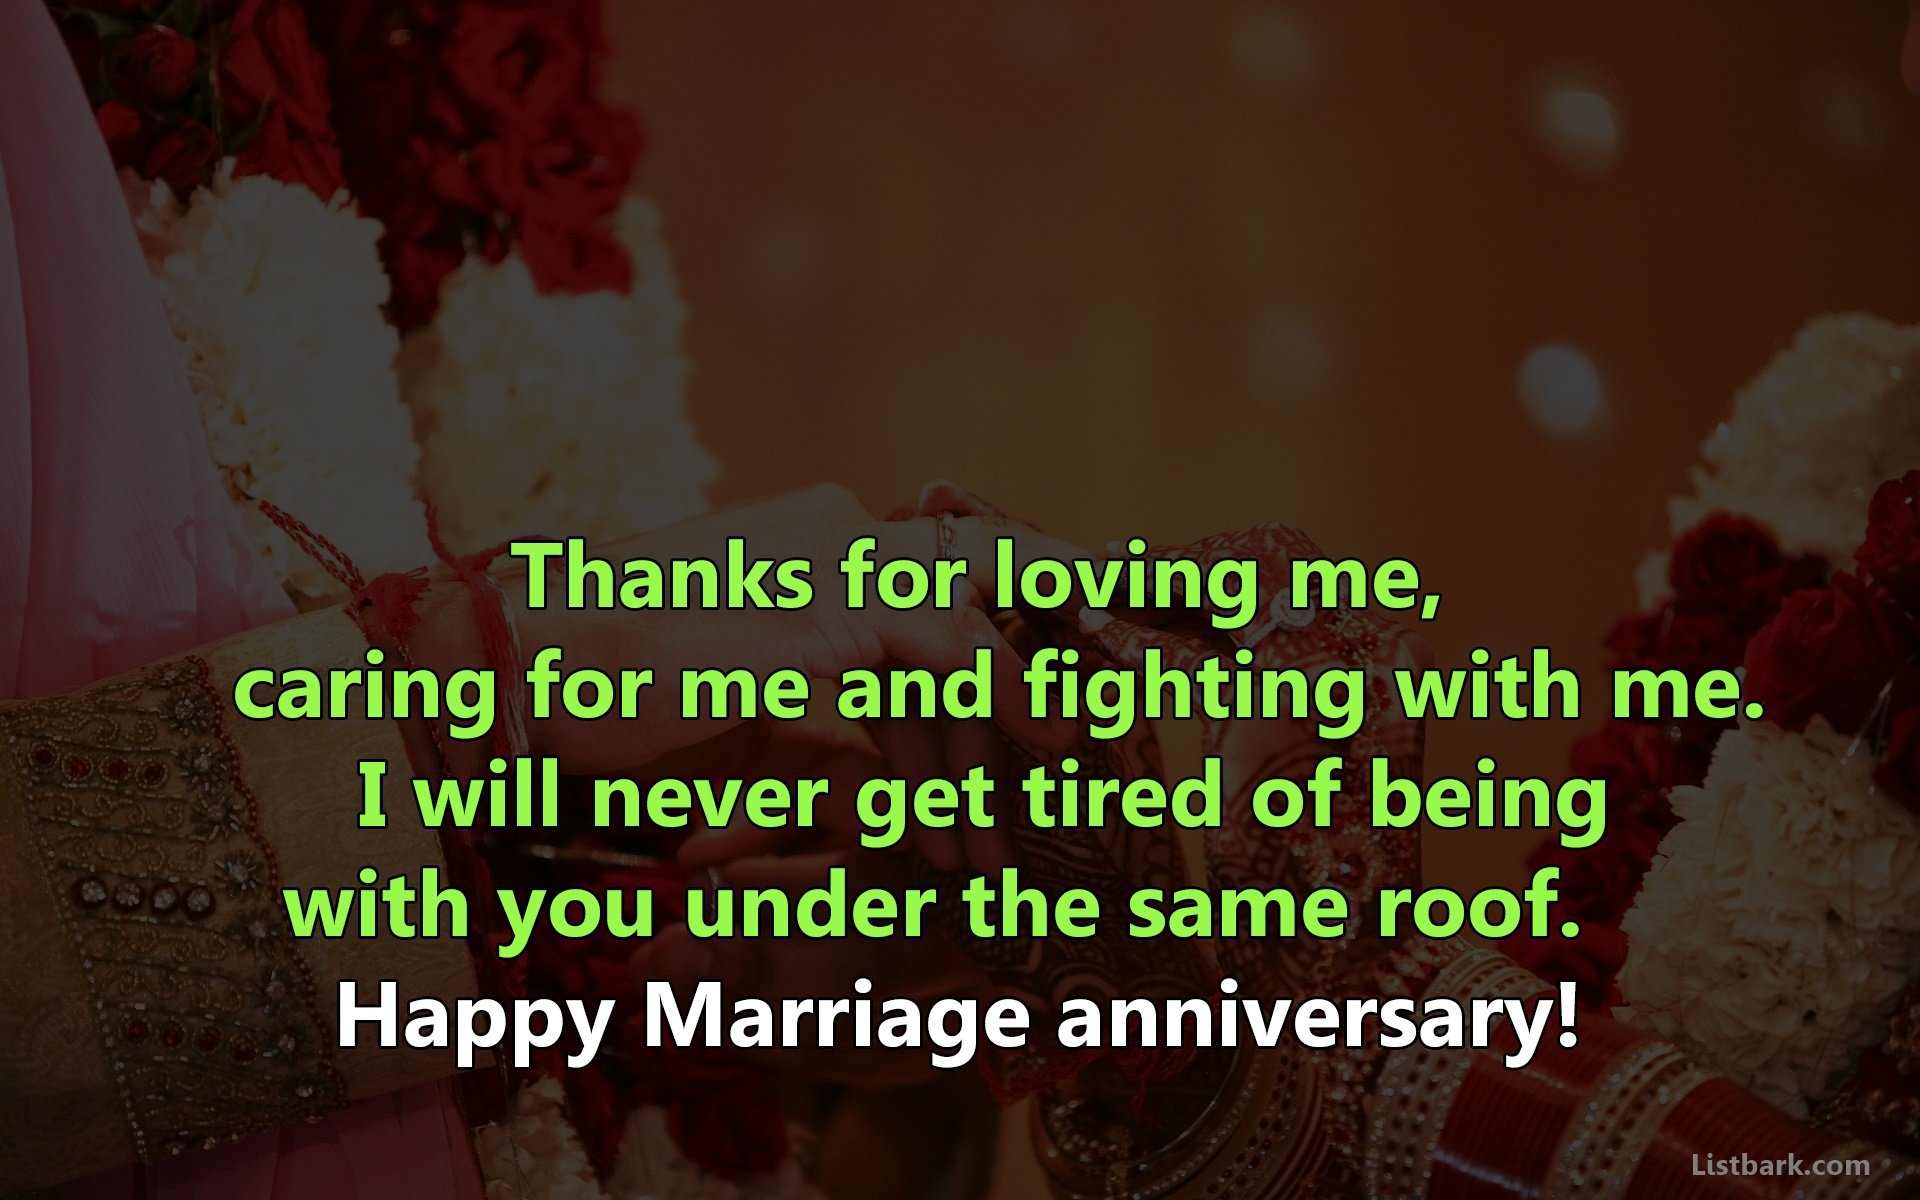 Wedding Anniversary Wishes For Friend